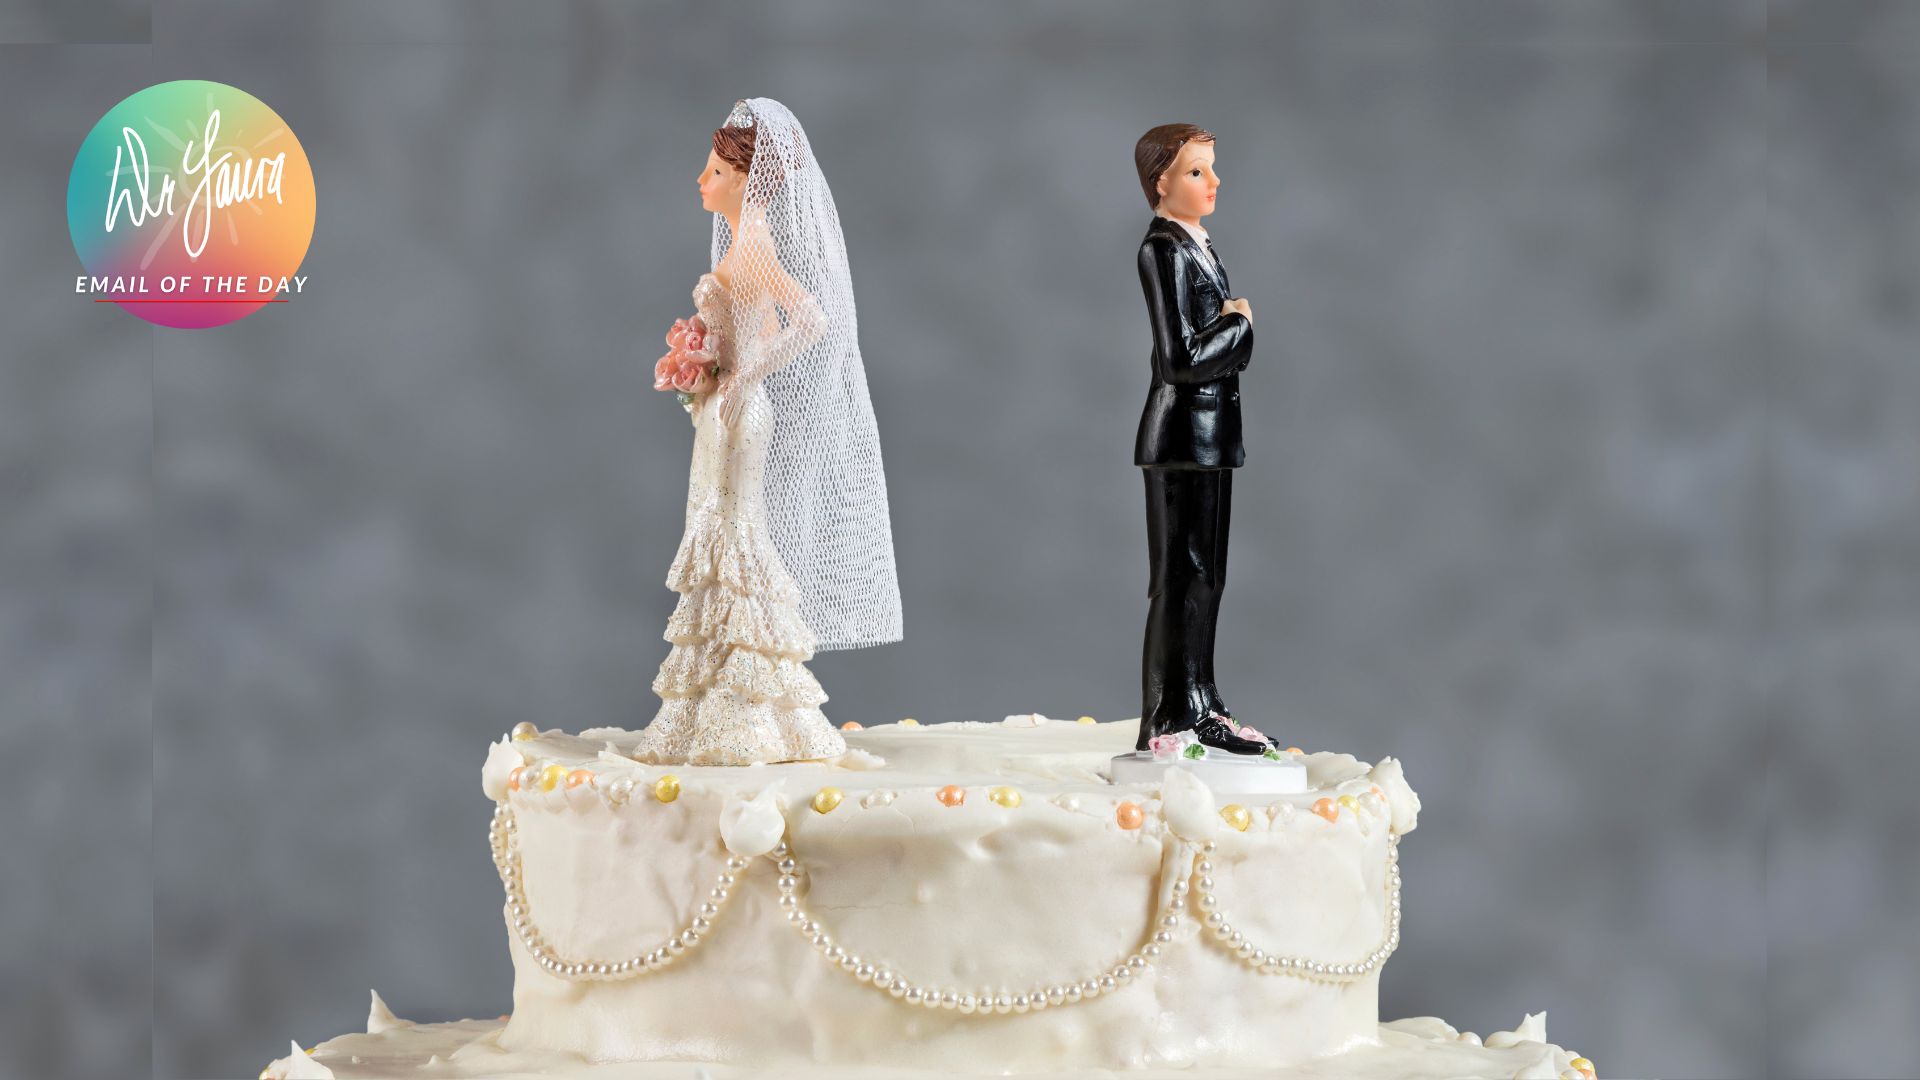 Wedding cake topper with bride and groom figures facing away from each other